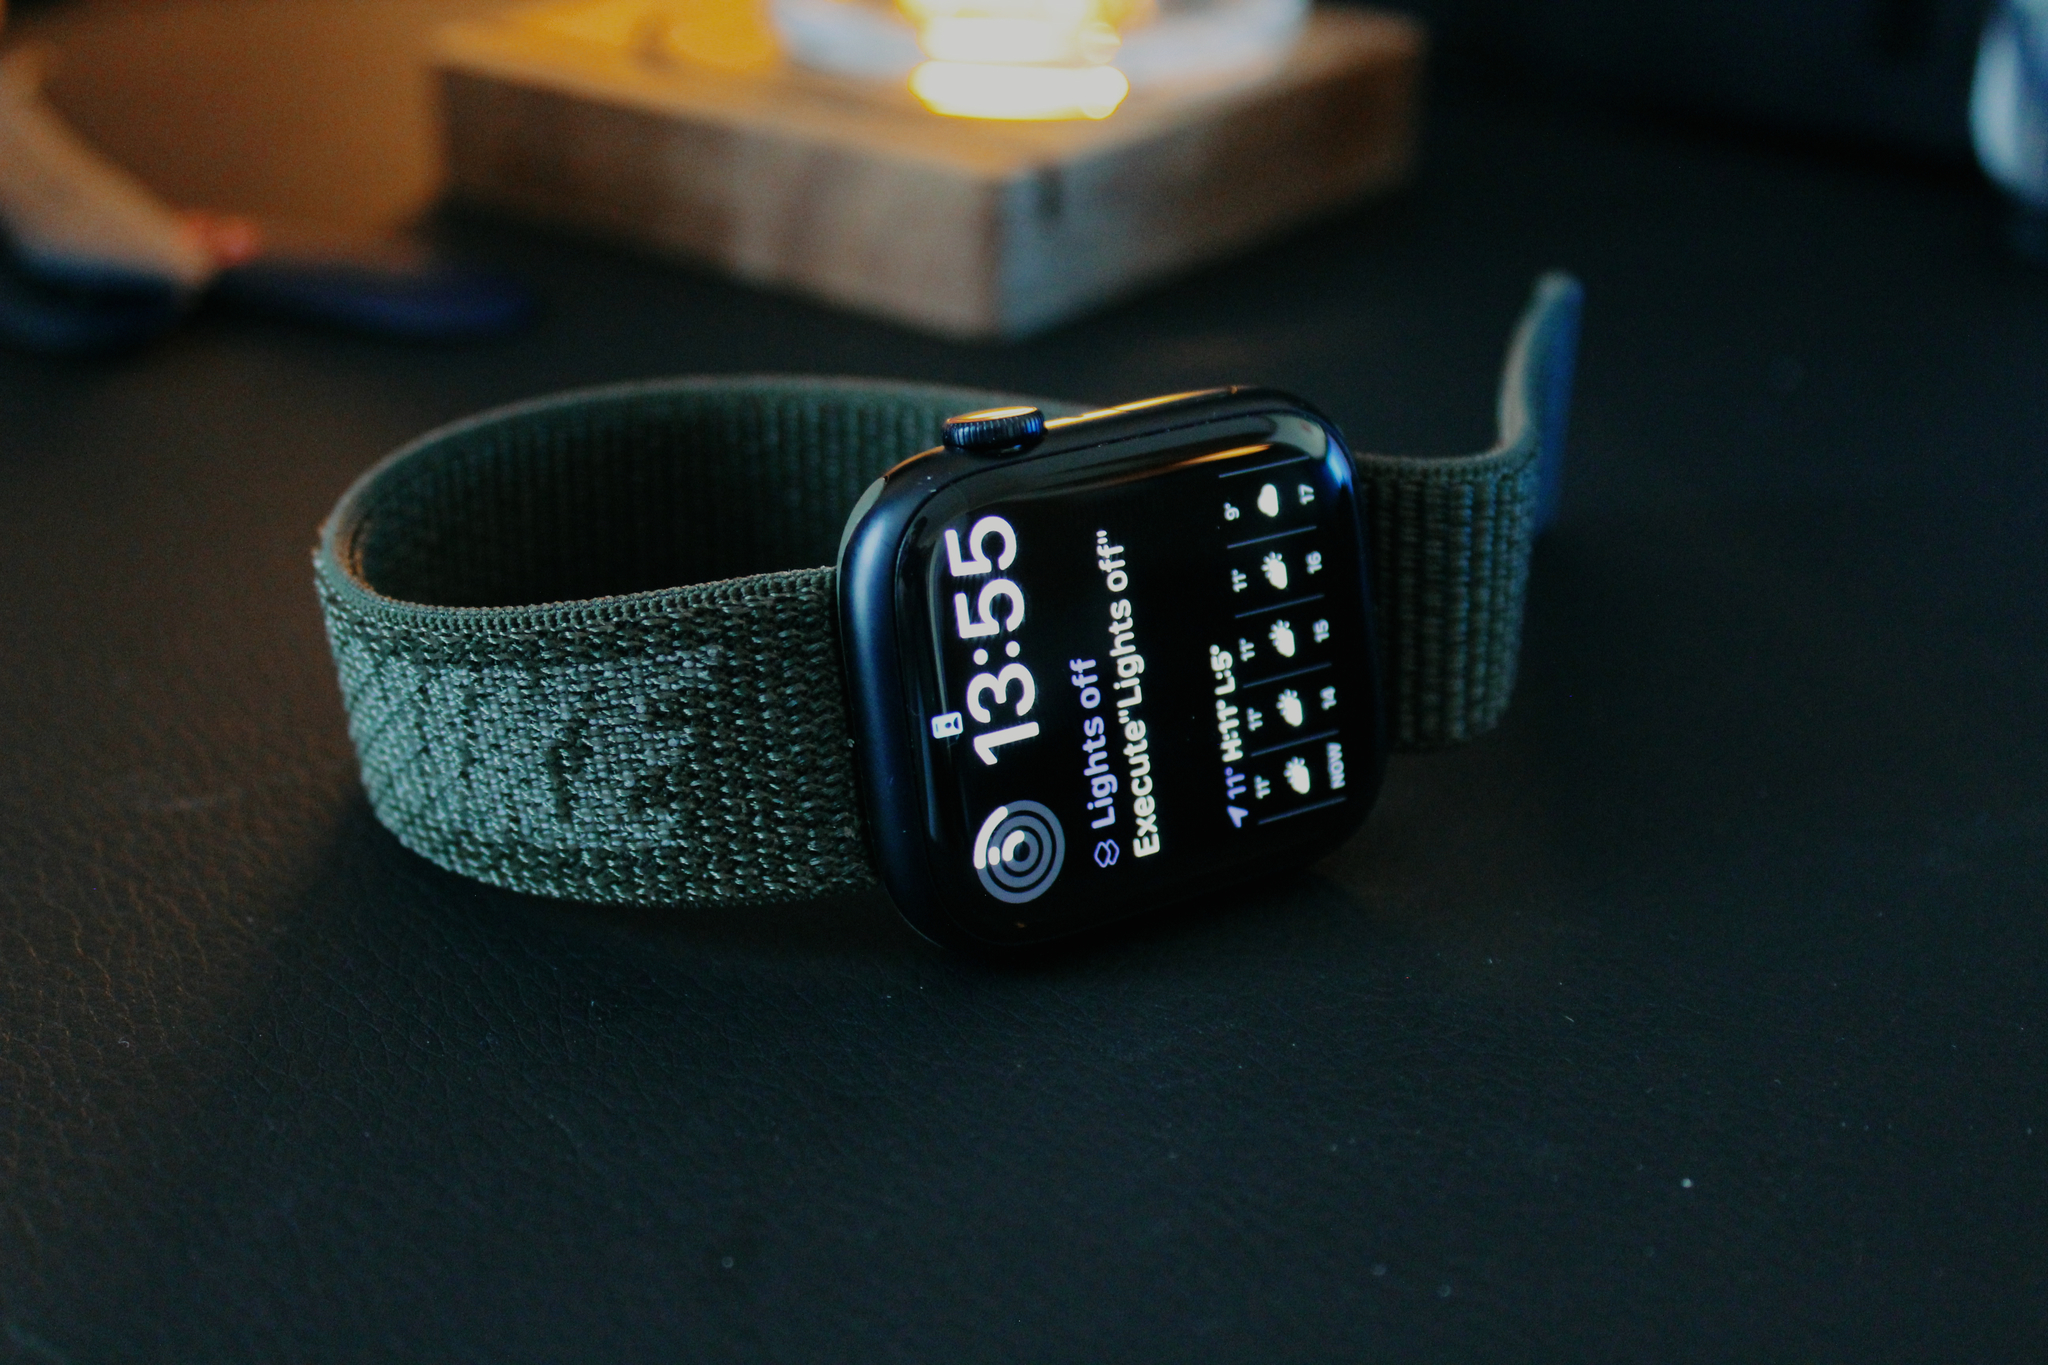 Meta’s Apple Watch rival is no more – and with it goes some promising ideas